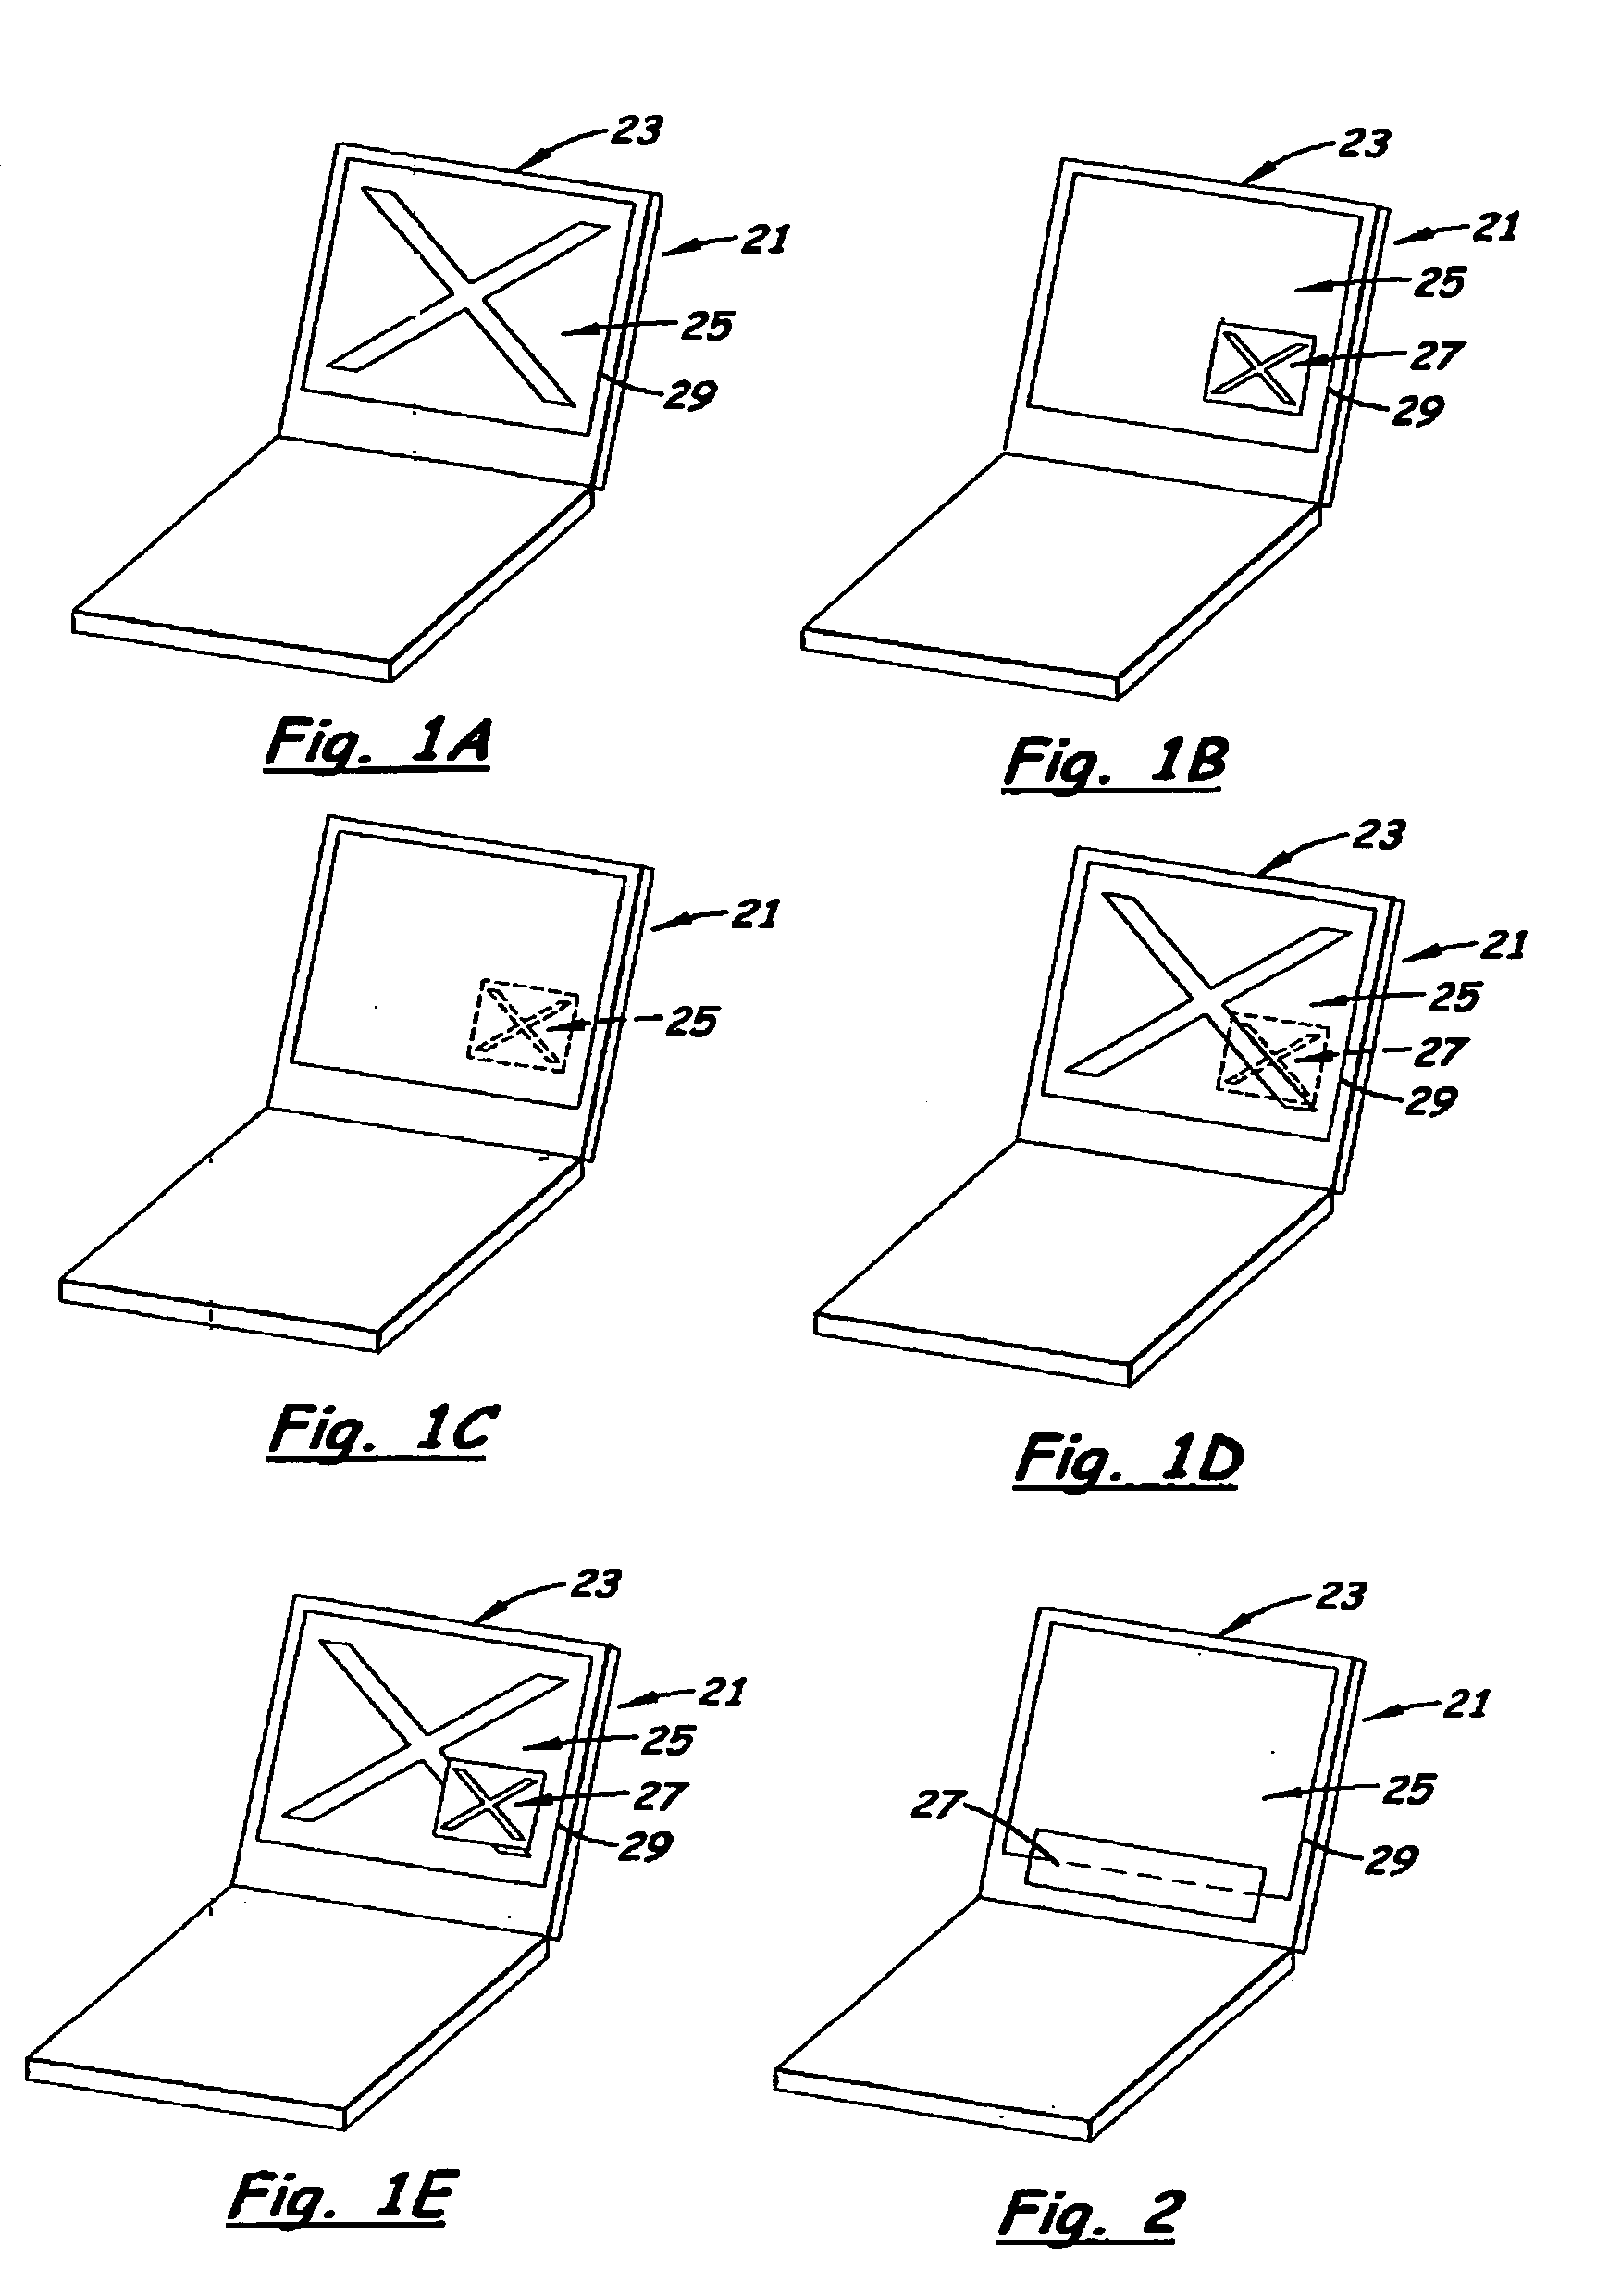 Image generating system having primary and auxiliary display